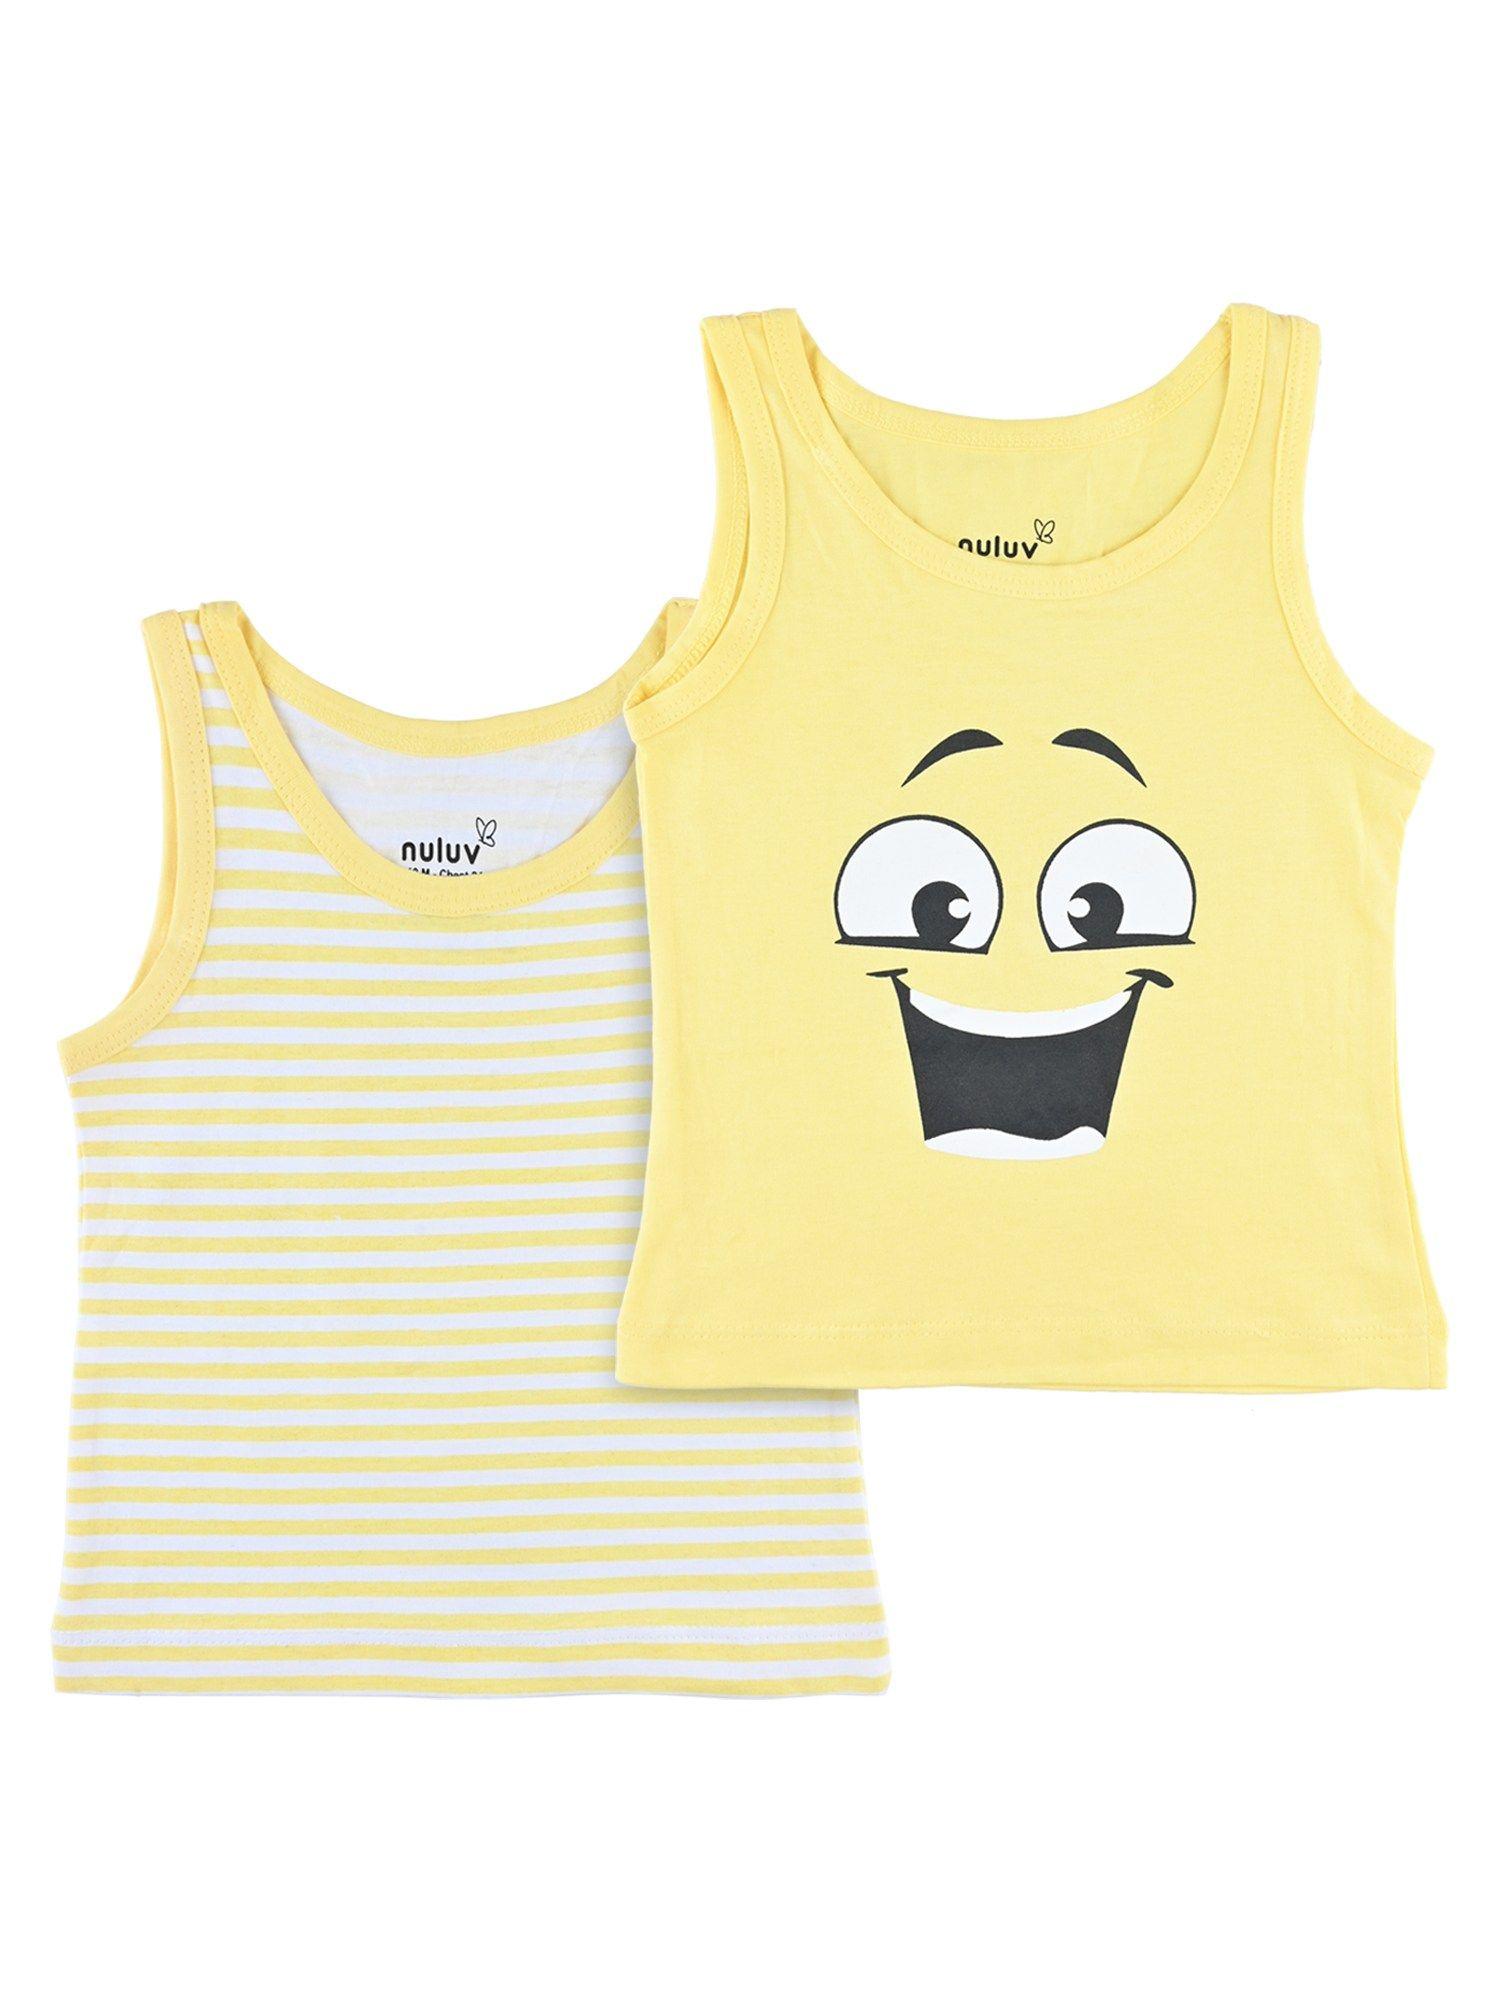 boys-cotton-printed-yellow-vest-(pack-of-2)